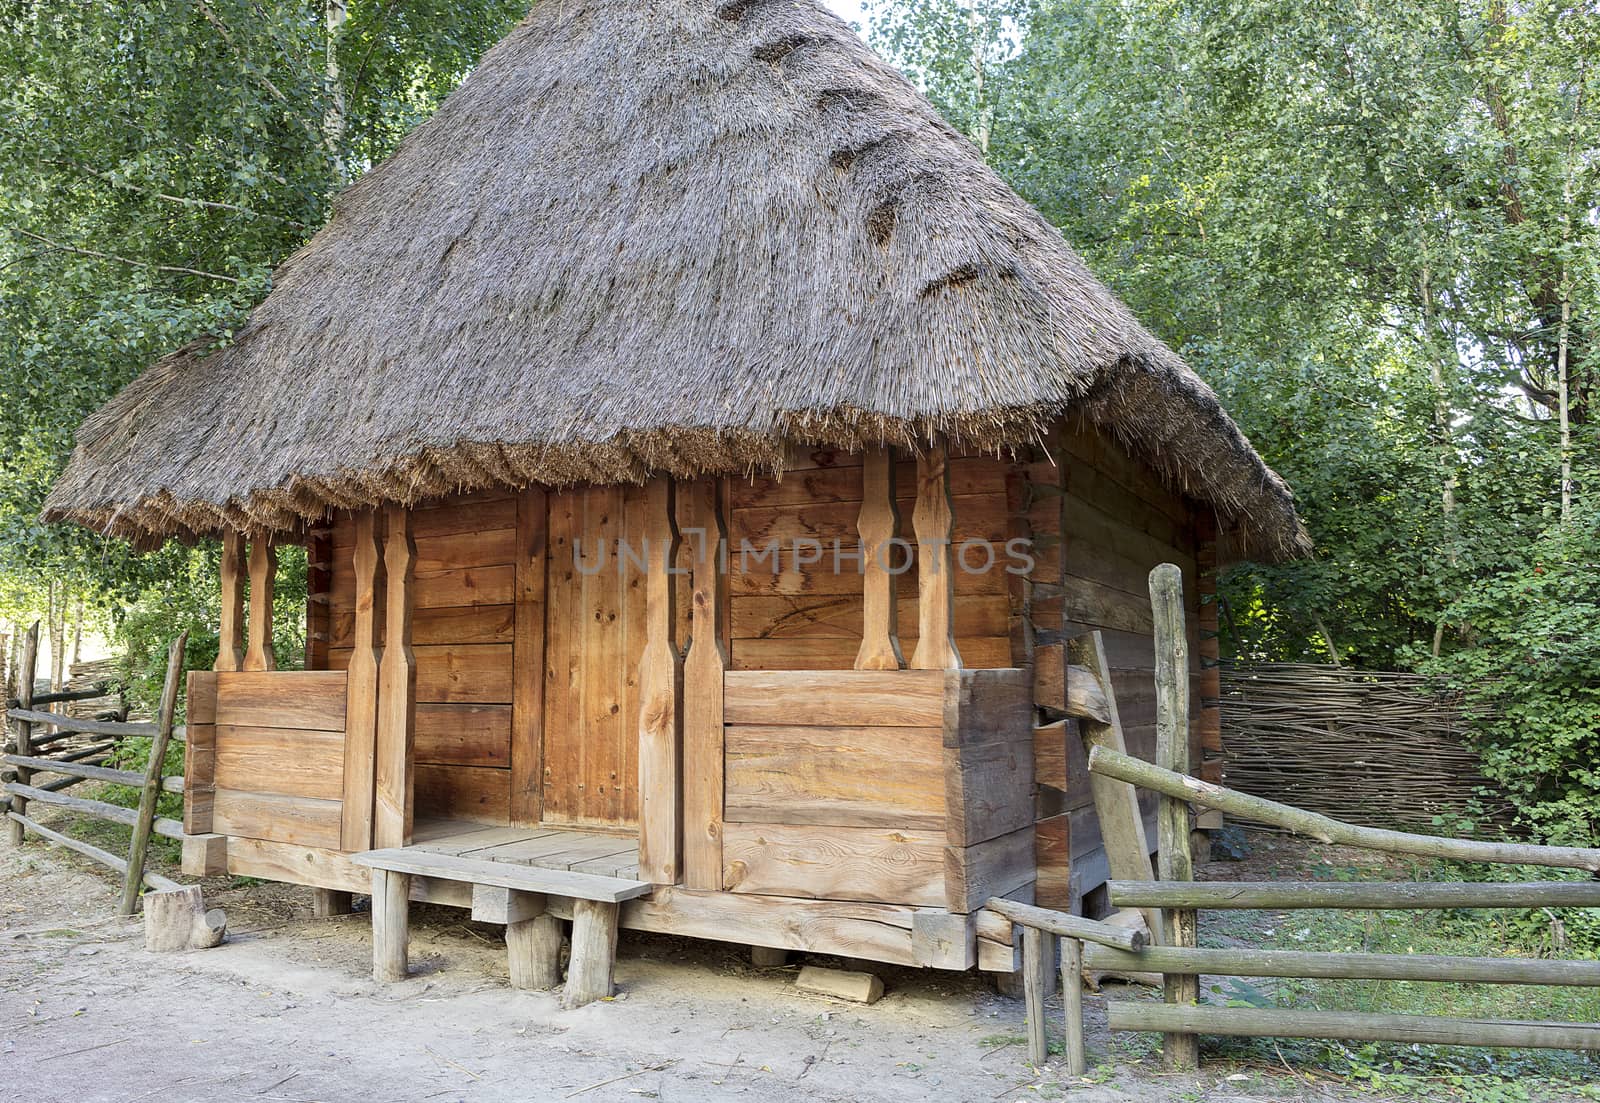 Old traditional Ukrainian rural barn with a thatched roof and a wooden, wicker fence around it in a green garden